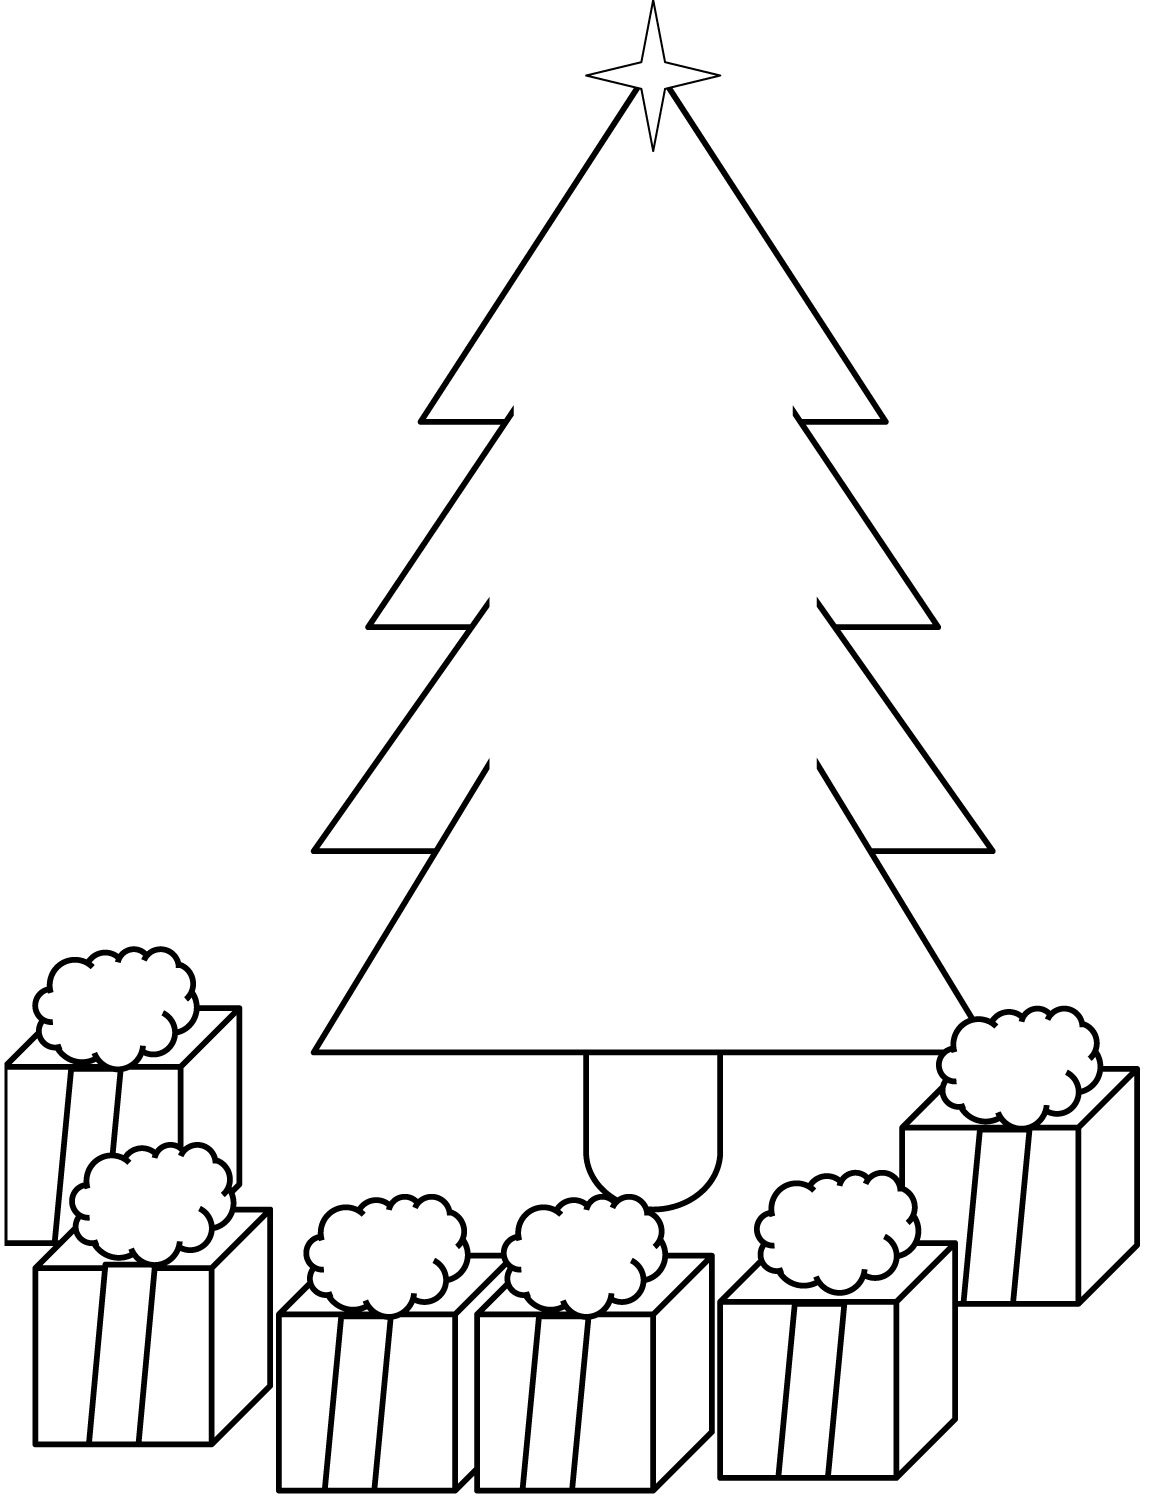 Presents Under Christmas Tree Coloring Page